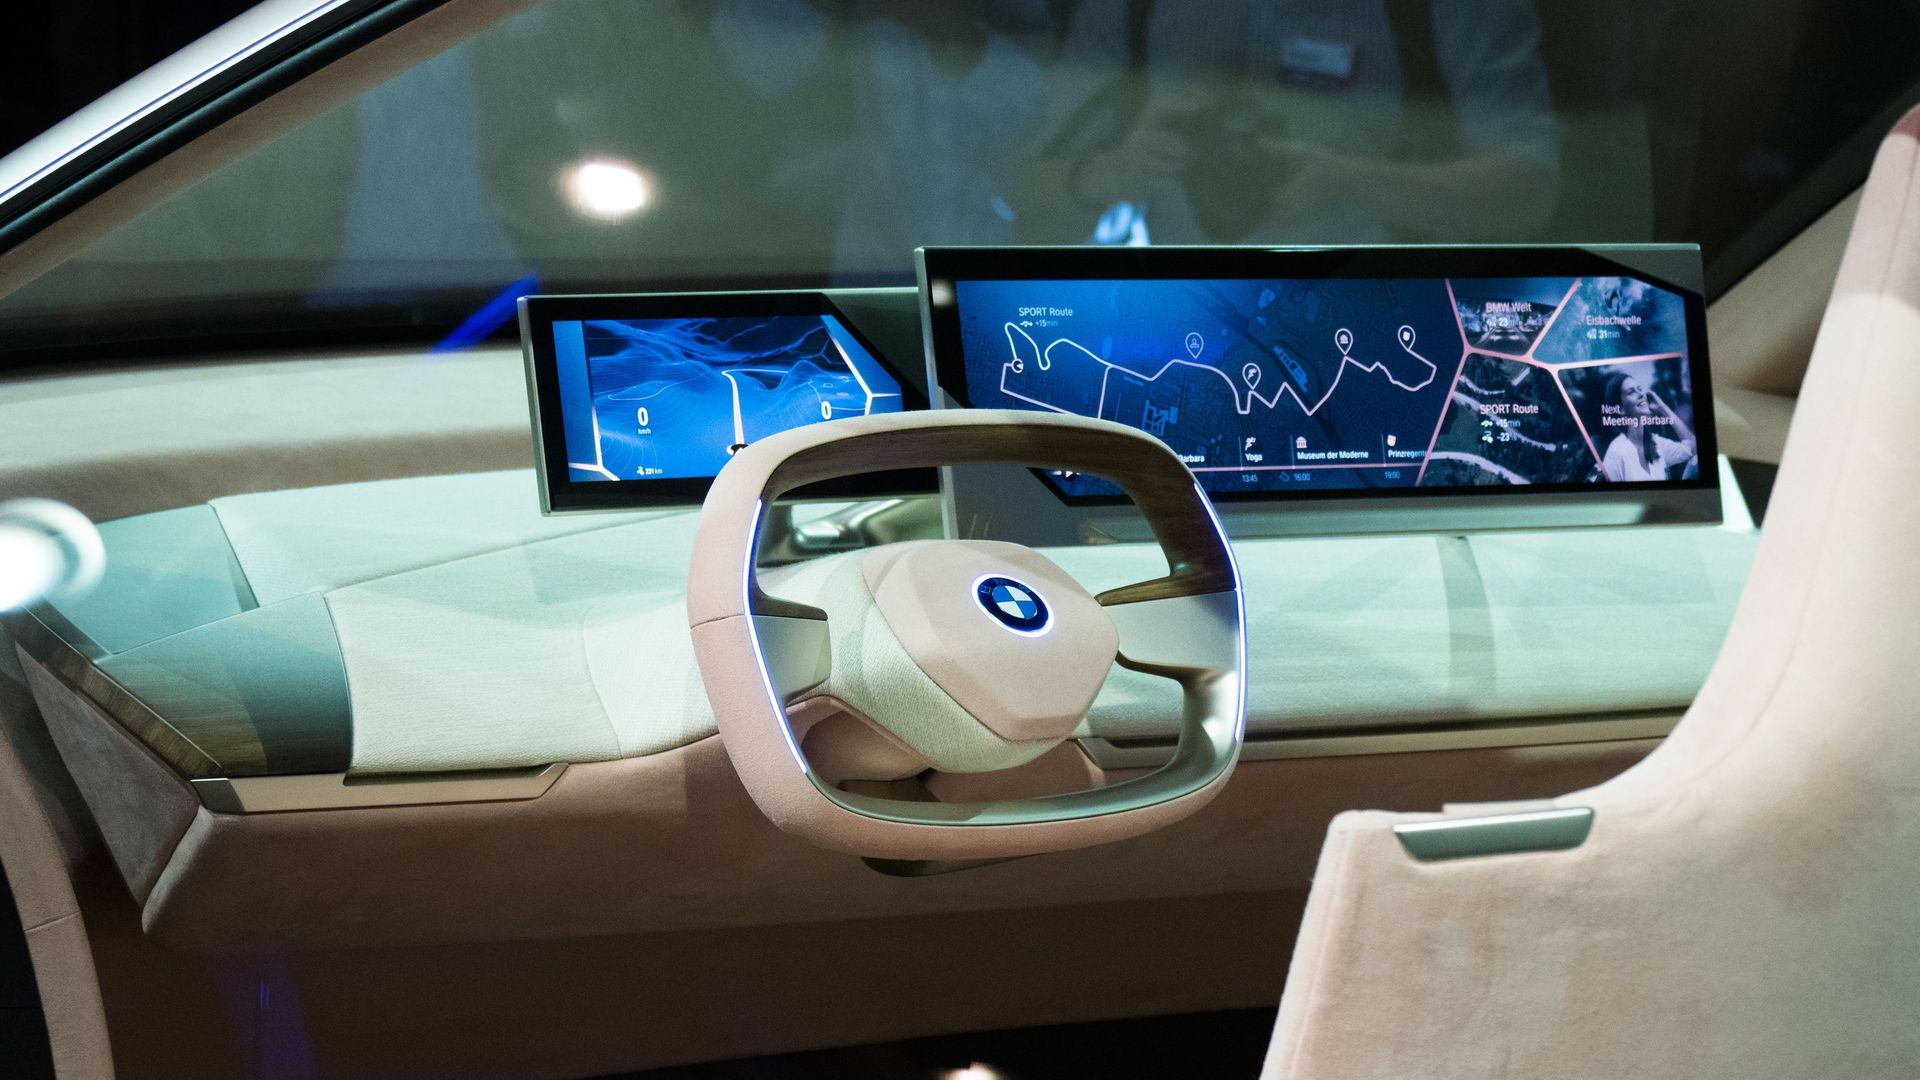 The steering wheel and display inside the BMW Vision iNEXT are unveiled at a special event ahead of the LA Auto Show, November 27, 2018 in Los Angeles. 